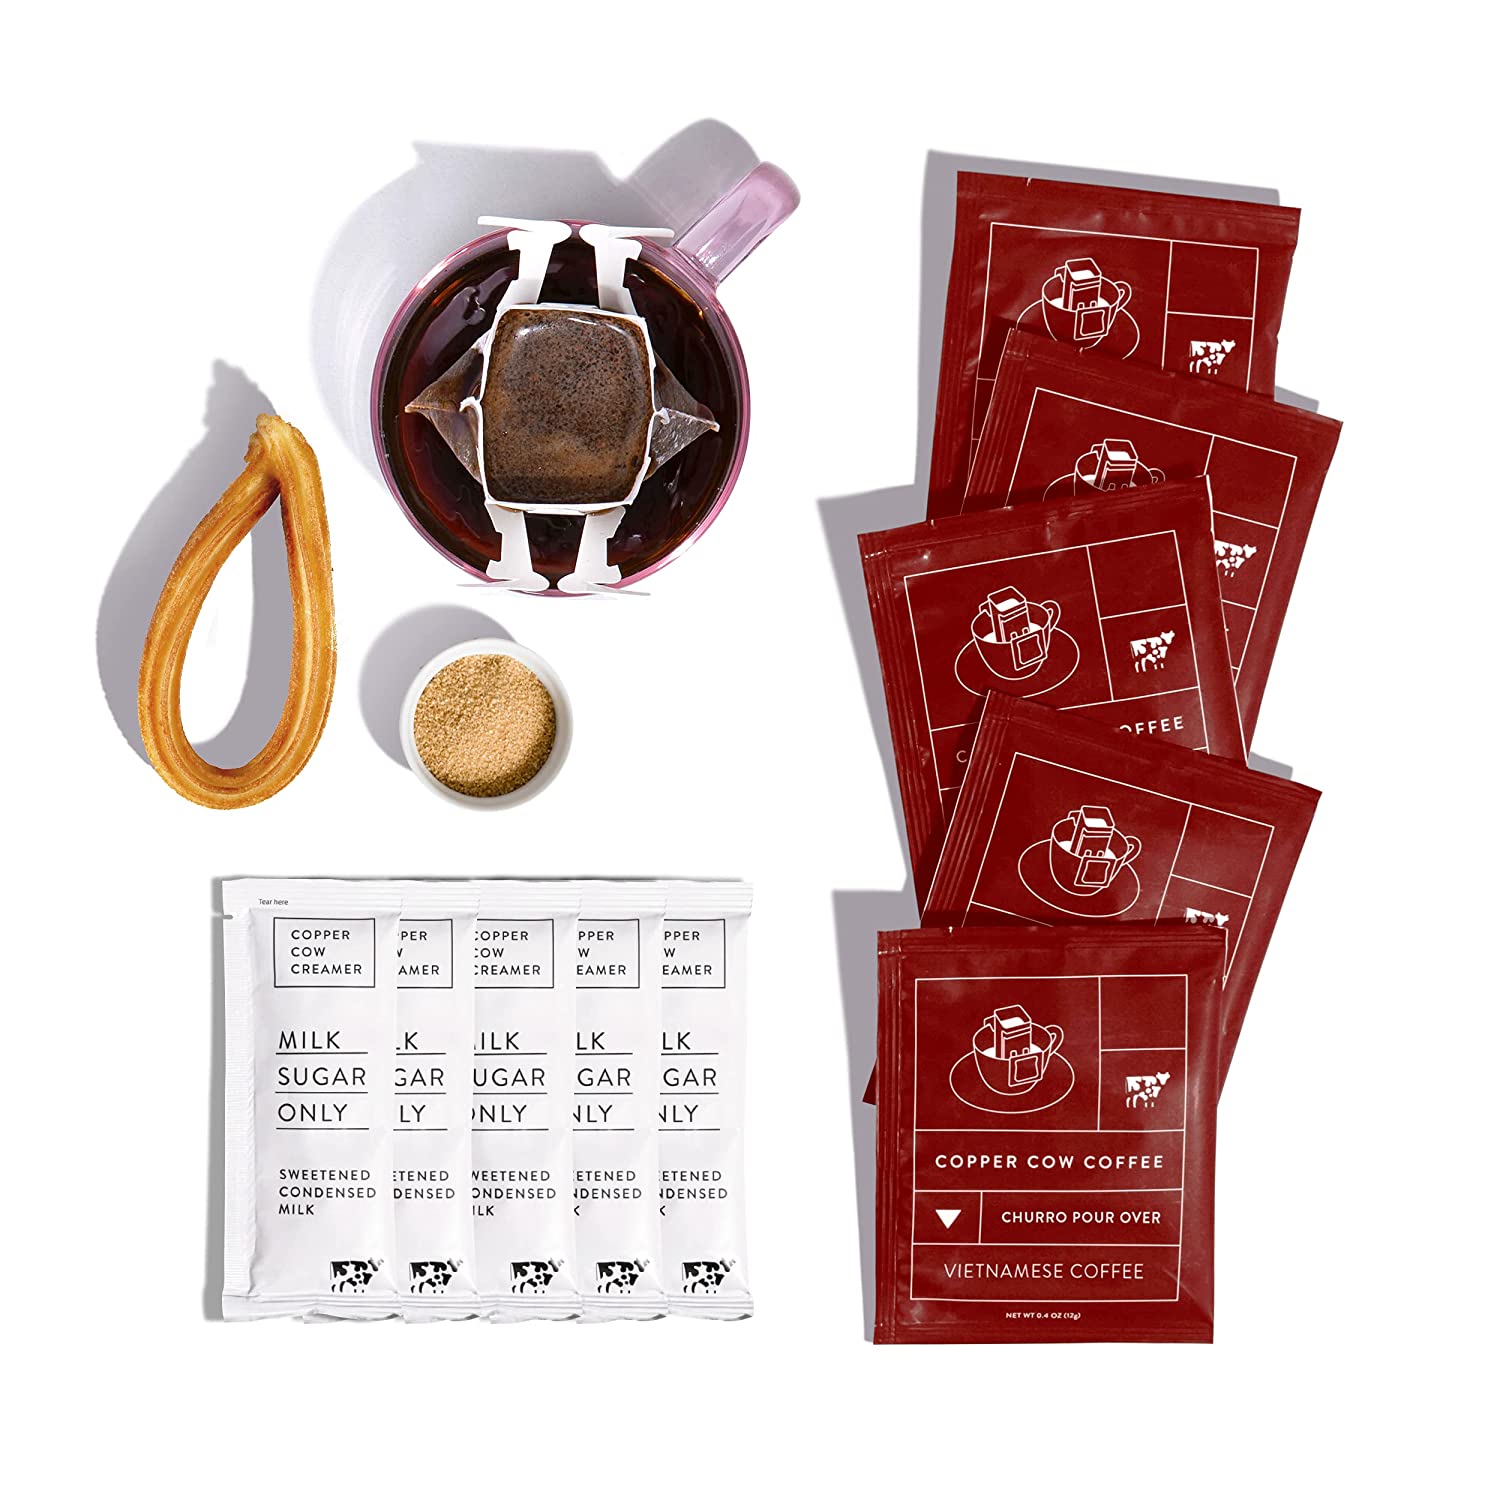 I tested Copper Cow's Vietnamese-style coffee packs and discovered that making my favorite drink on the move was simple